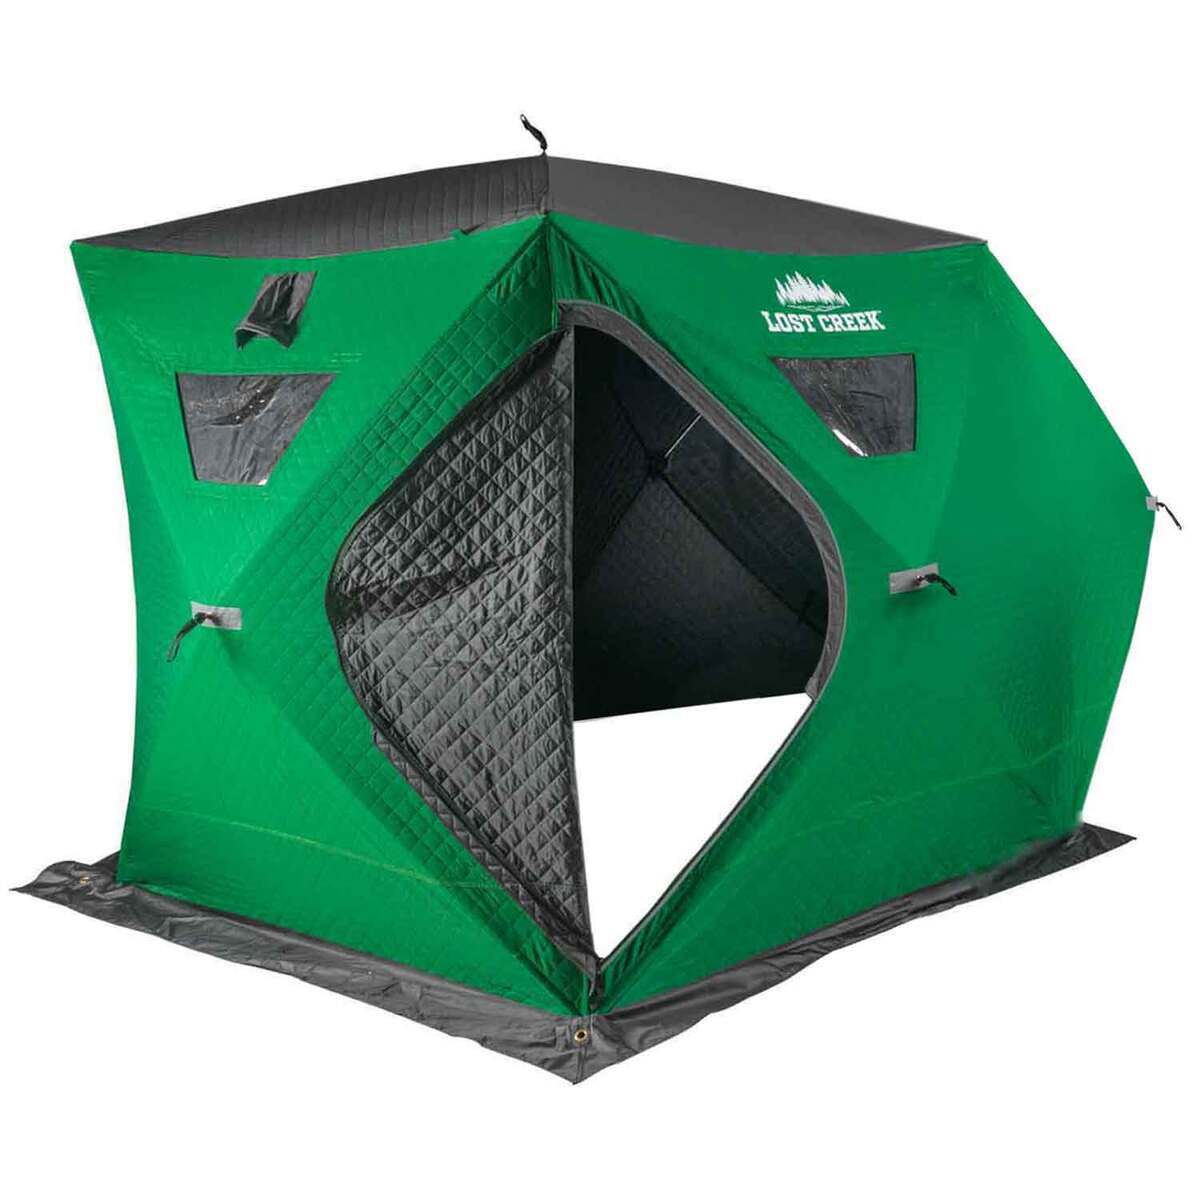 Lost Creek 6 Person Thermal Ice Fishing Tent Review (Is It Worth